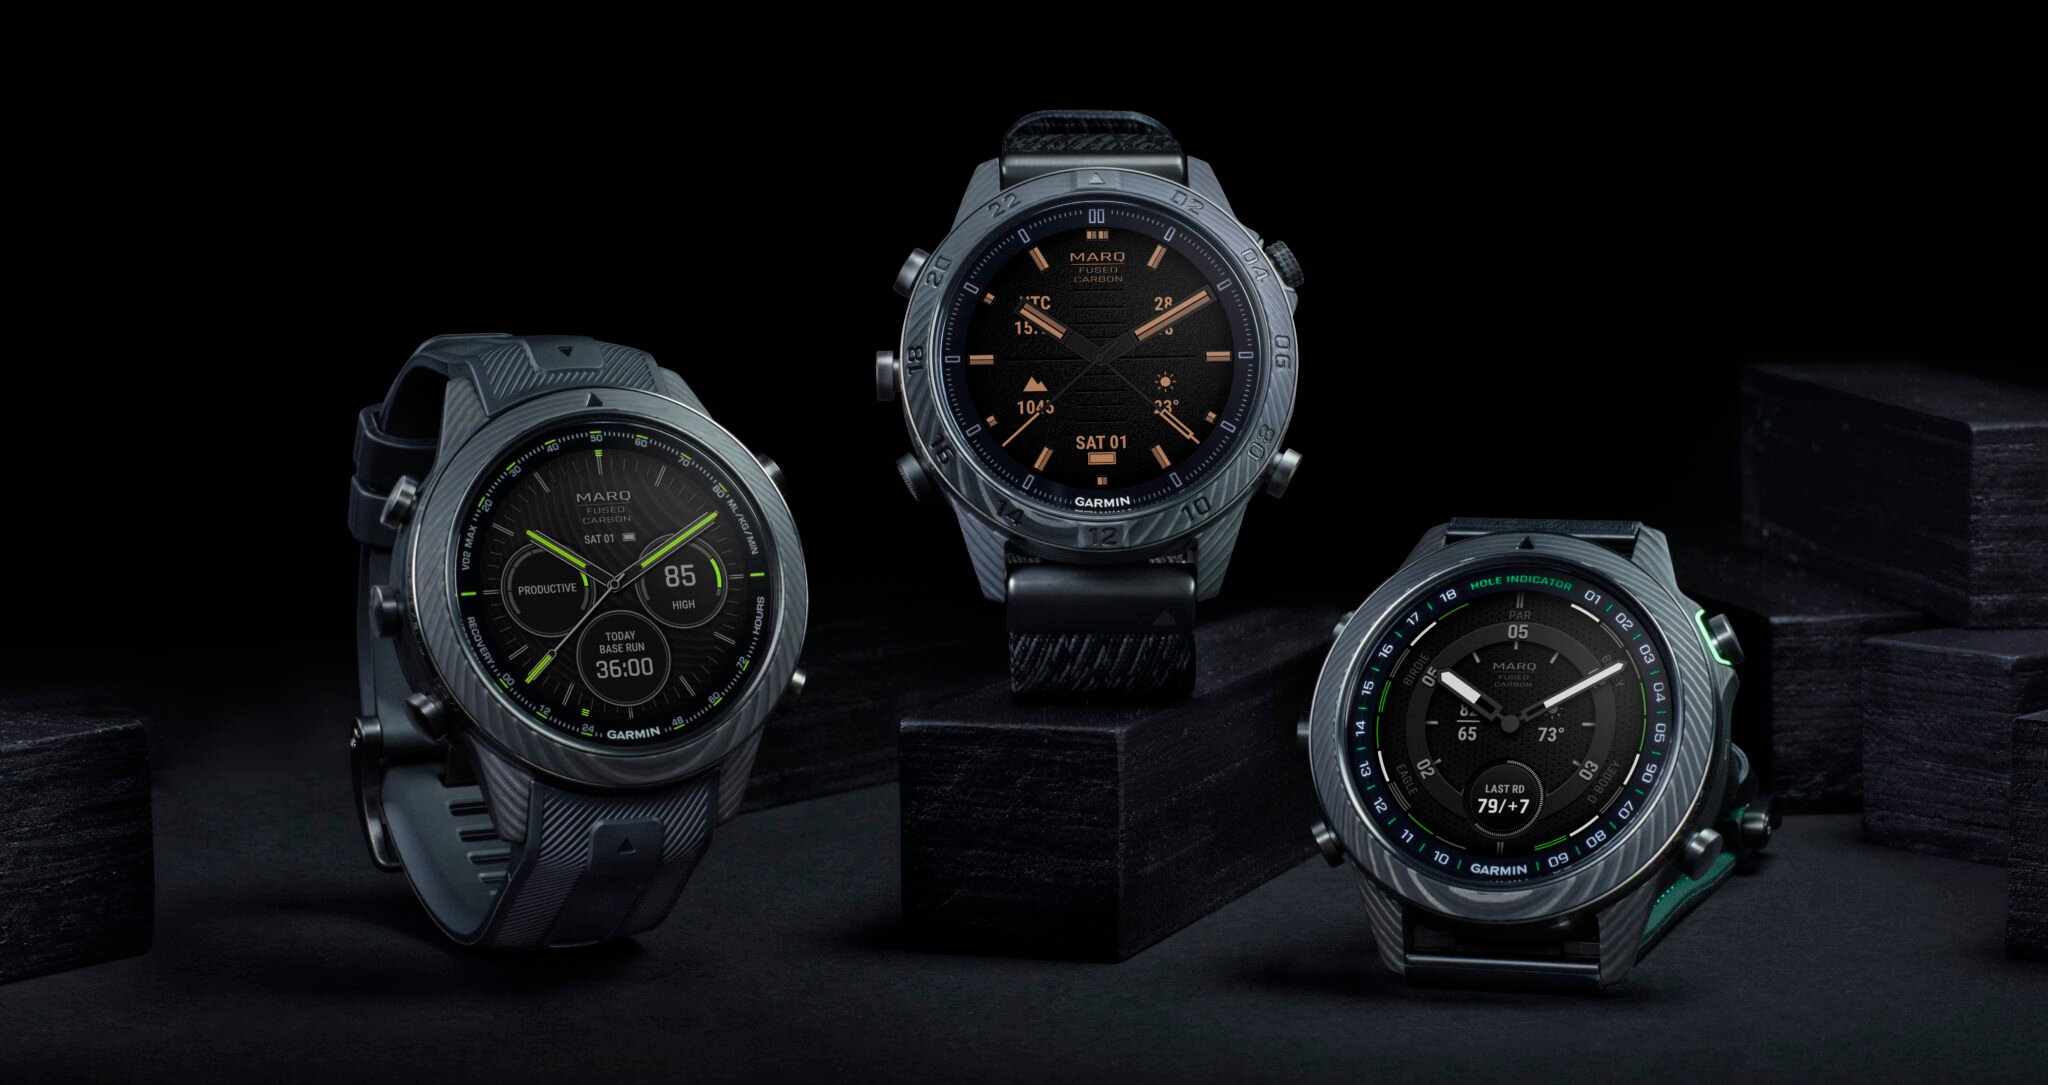 Garmin MARQ Carbon: modern tool watches crafted from carbon fiber